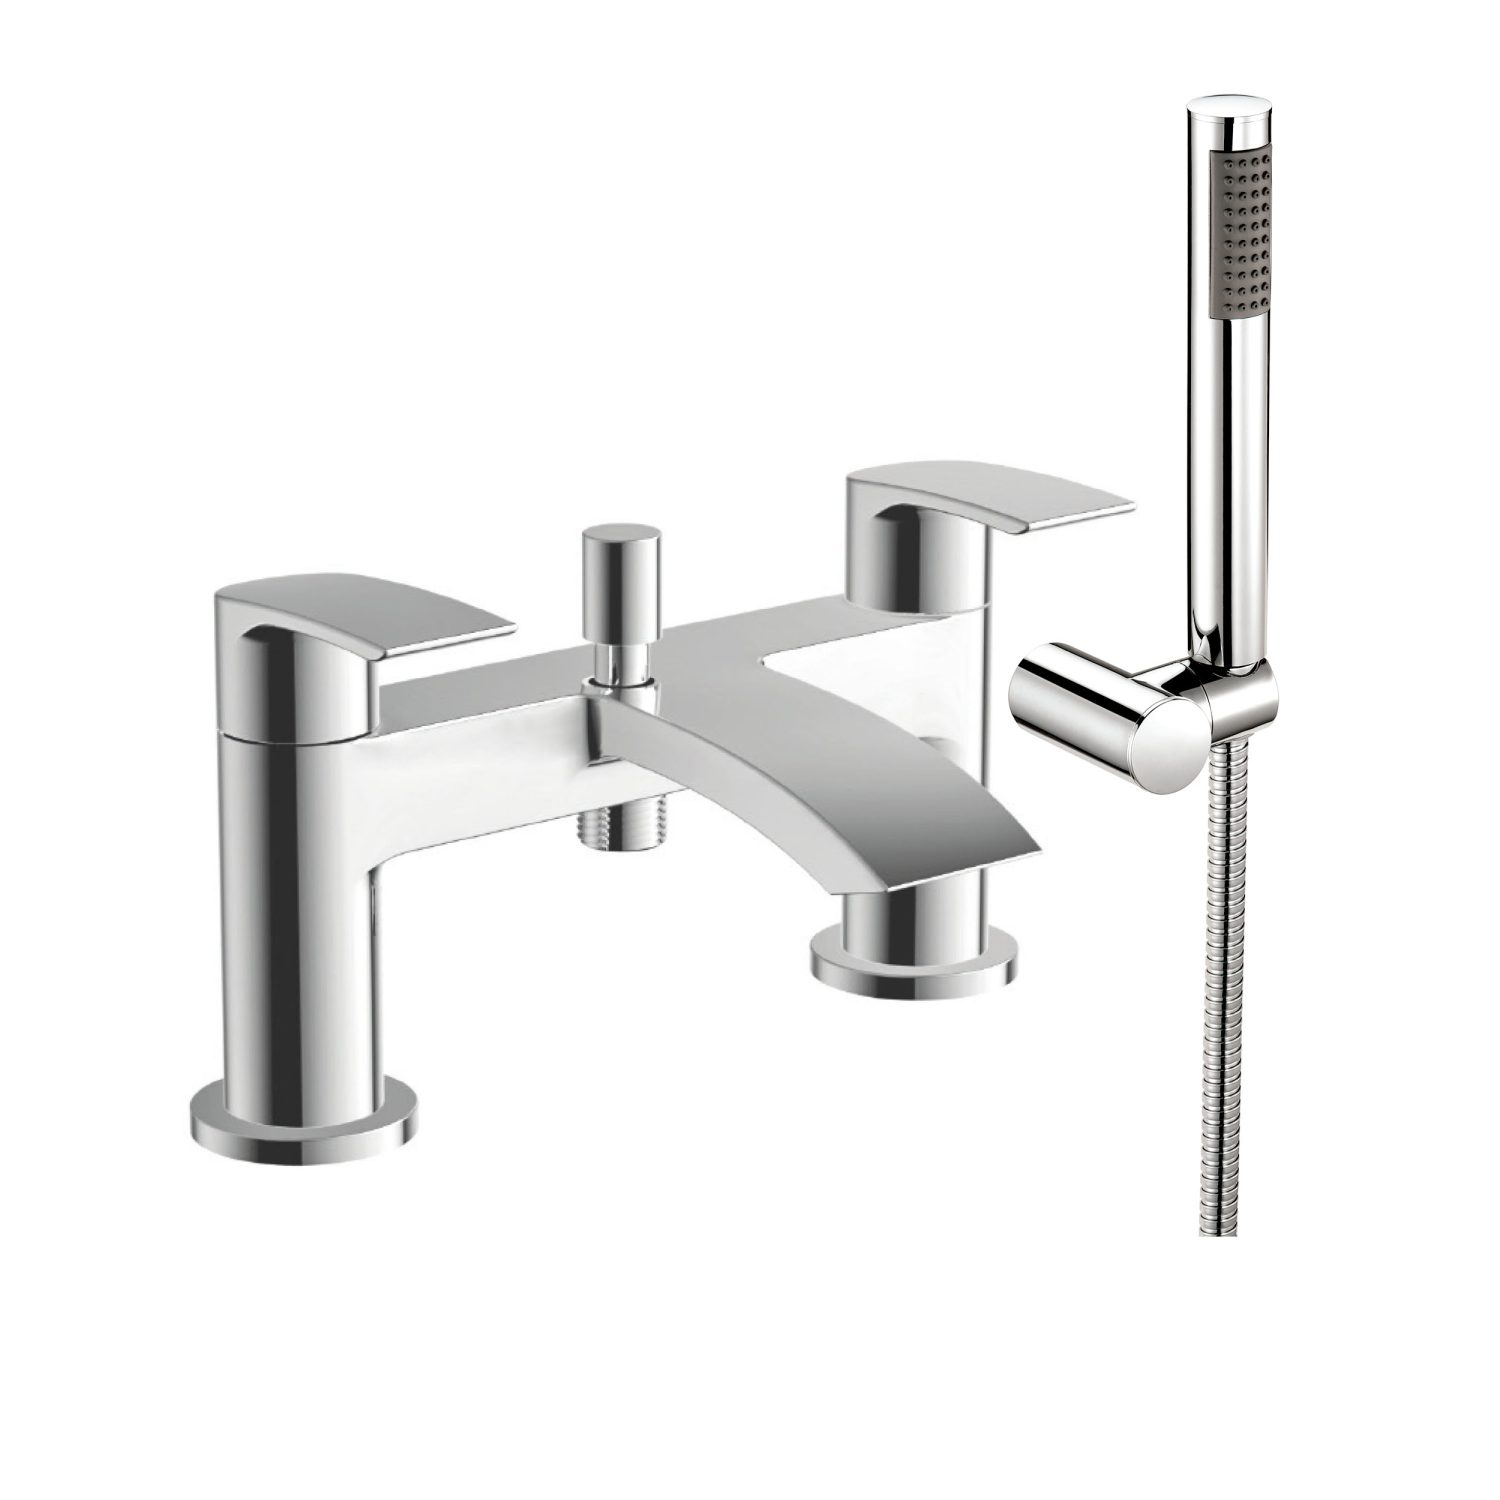 Belini Bath Shower Mixer with shower kit and wall bracket